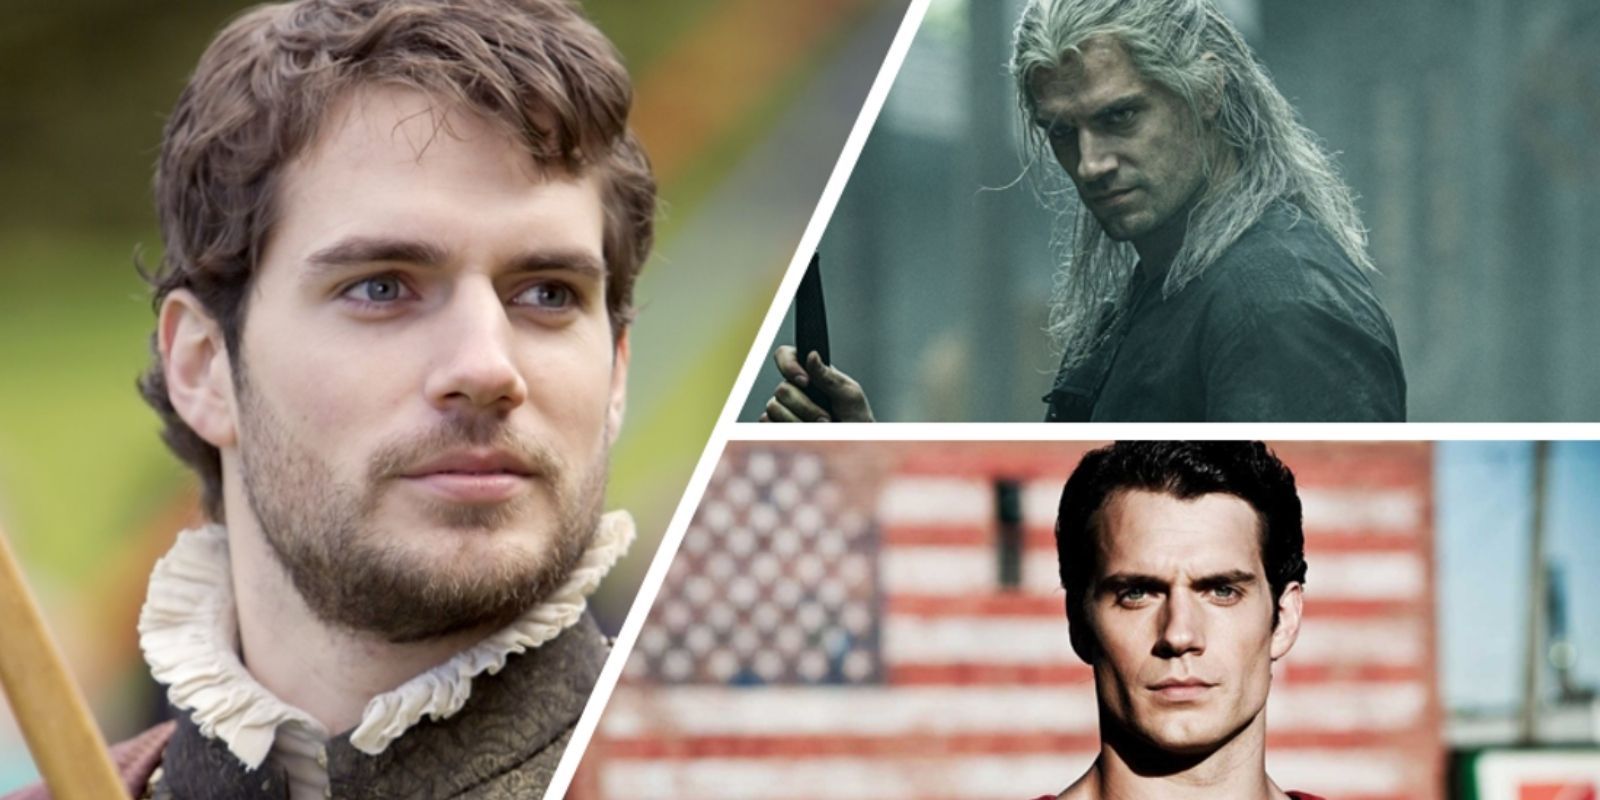 Henry Cavill's 10 Best Roles, According To Rotten Tomatoes